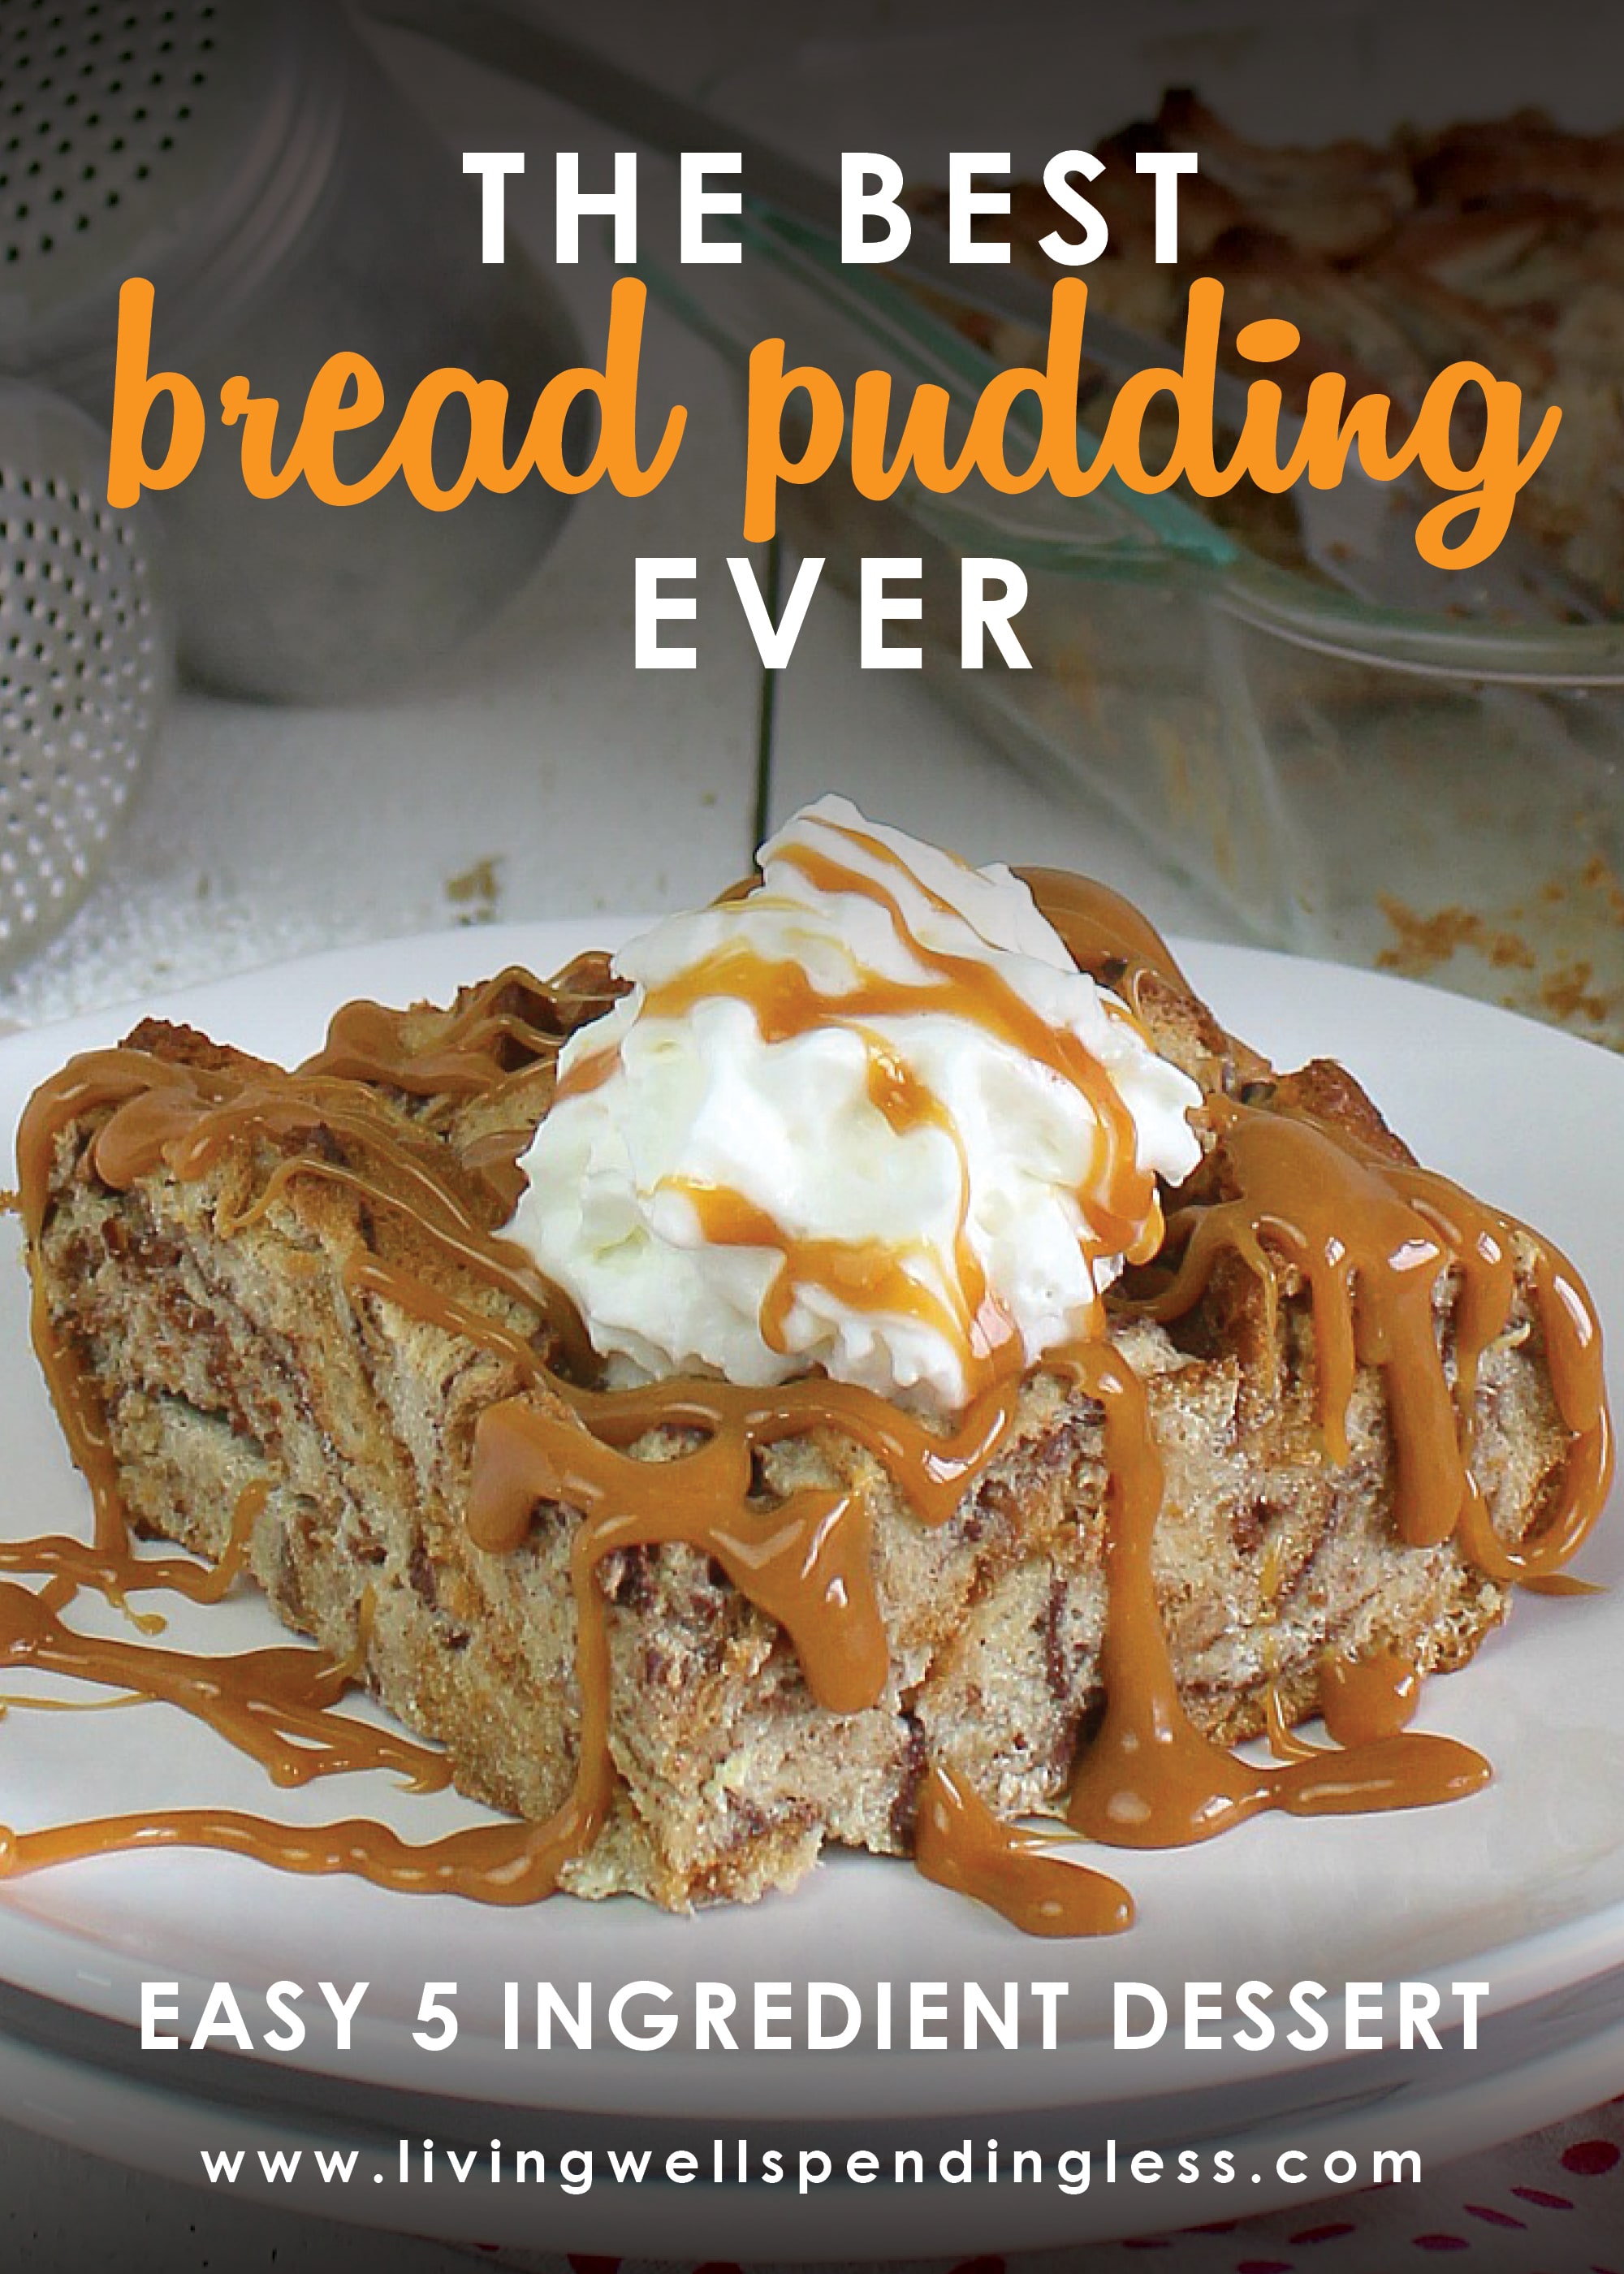 The Best Bread Pudding Ever - Living Well Spending Less®